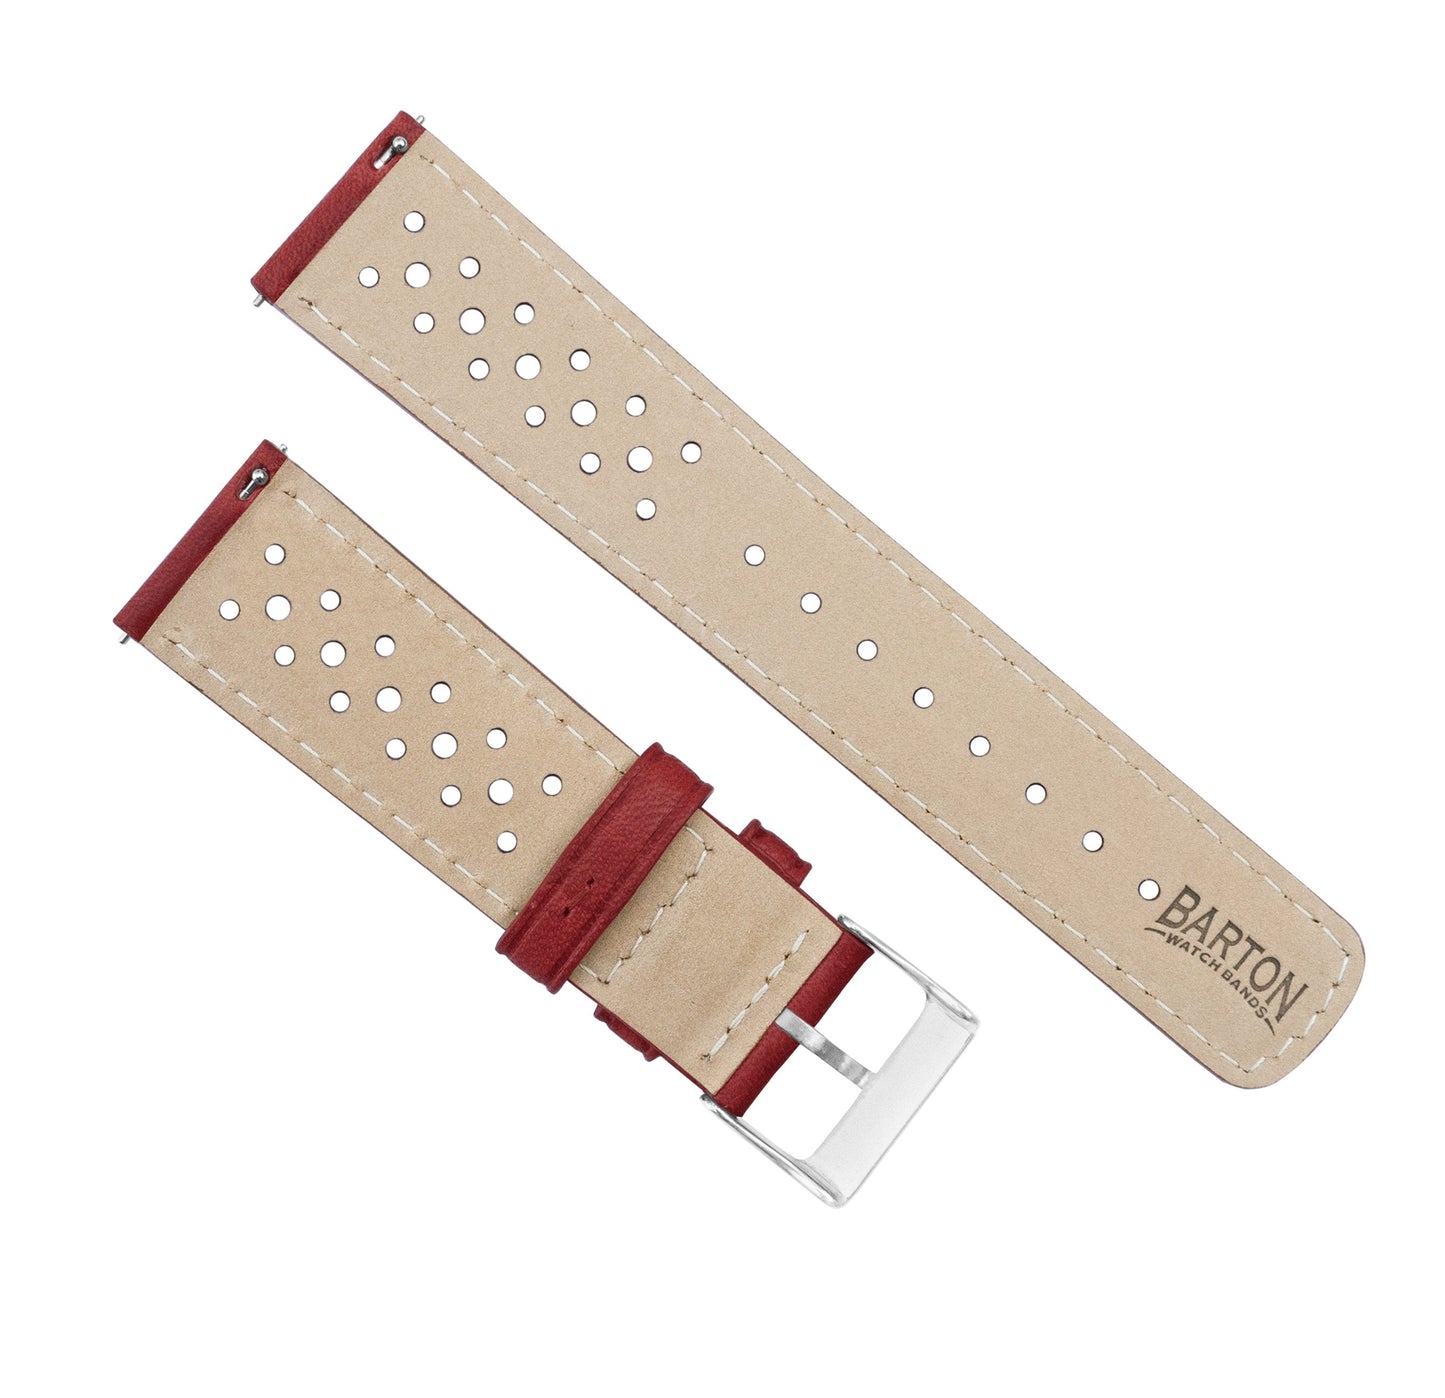 MOONSWATCH Bip | Racing Horween Leather | Crimson Red - Barton Watch Bands